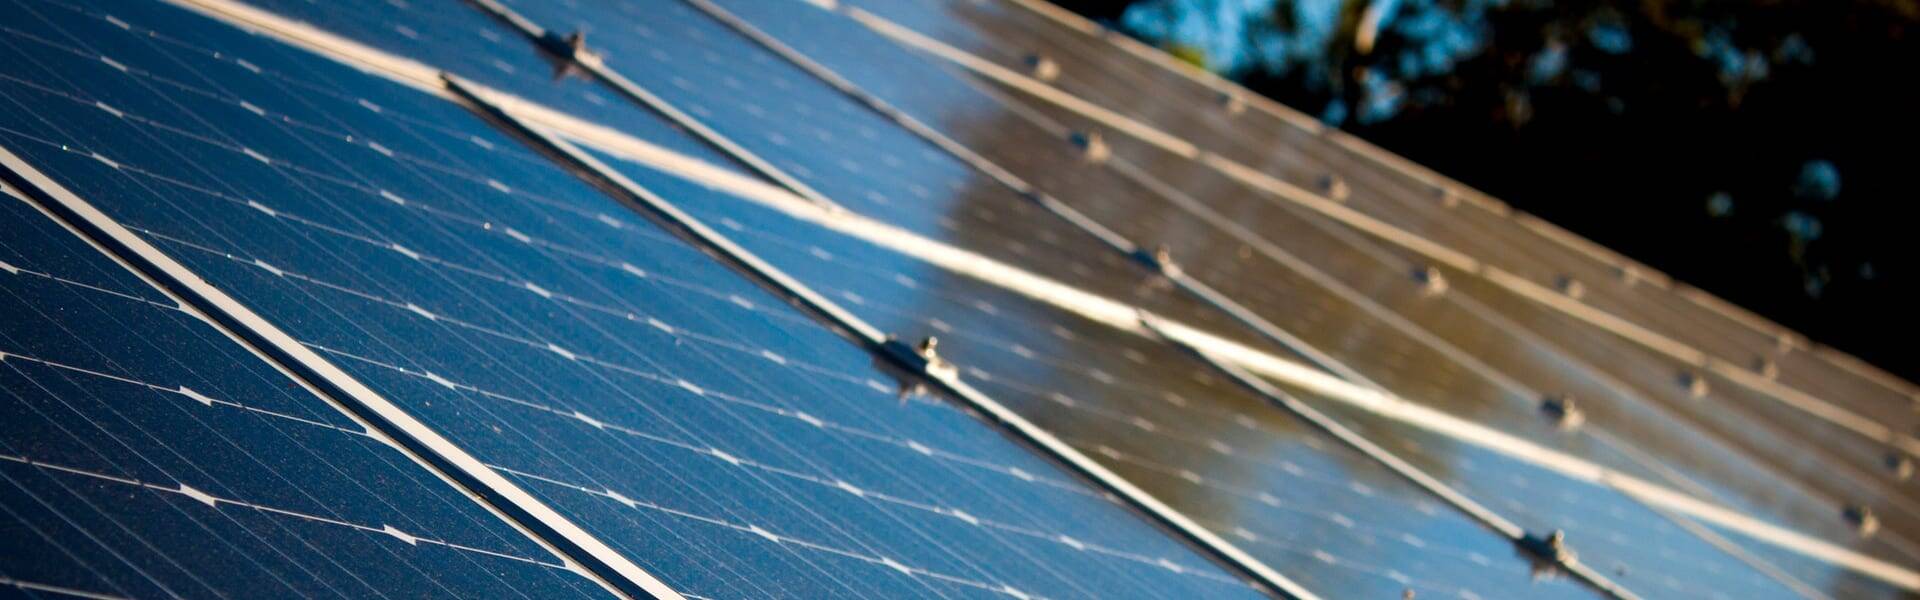 Social Energy expands into Australia with solar offering